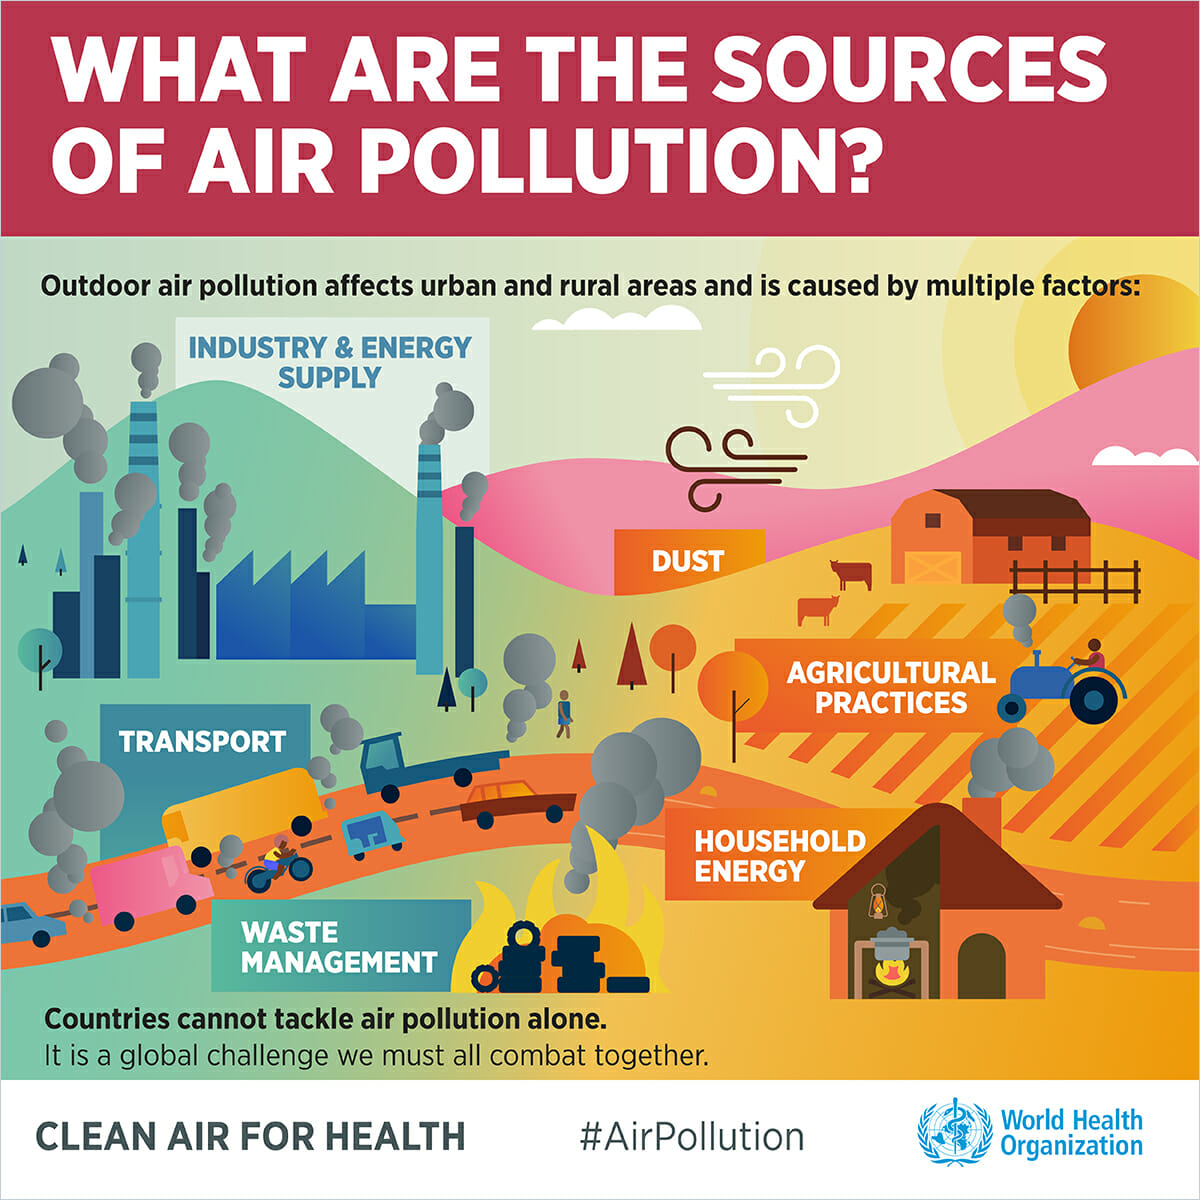 9 out of 10 people worldwide breathe polluted air, but more countries ...